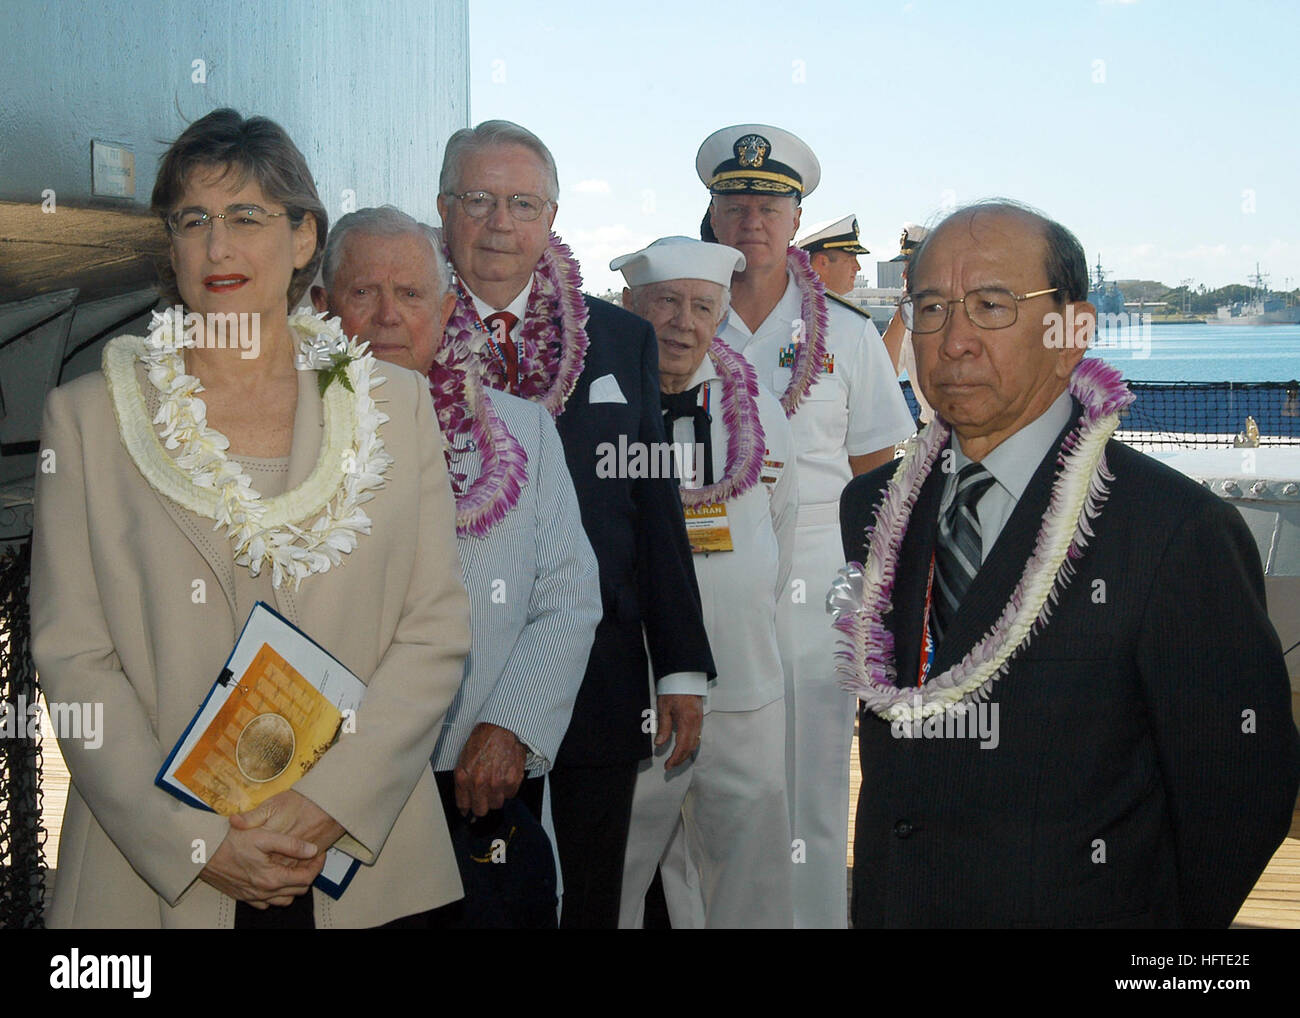 050902-N-6775N-096 Pearl Harbor, Hawaii (Sept. 2, 2005) - Members of the official party, including Hawaii Gov. Linda Lingle, prepare to enter the ceremonial stage prior to the start of the 60th Anniversary of the end of World War II held aboard the USS Missouri Memorial. The event, which included more than 2,500 military personnel, veterans and invited guests, commemorated Japan’s formal surrender and included a missing man fly-over of F-16s by the Hawaii National Guard, a U.S. Marine Corps rifle salute and remarks by U.S. Pacific Fleet Commander, Adm. Gary Roughead. U.S. Navy photo by Photogr Stock Photo